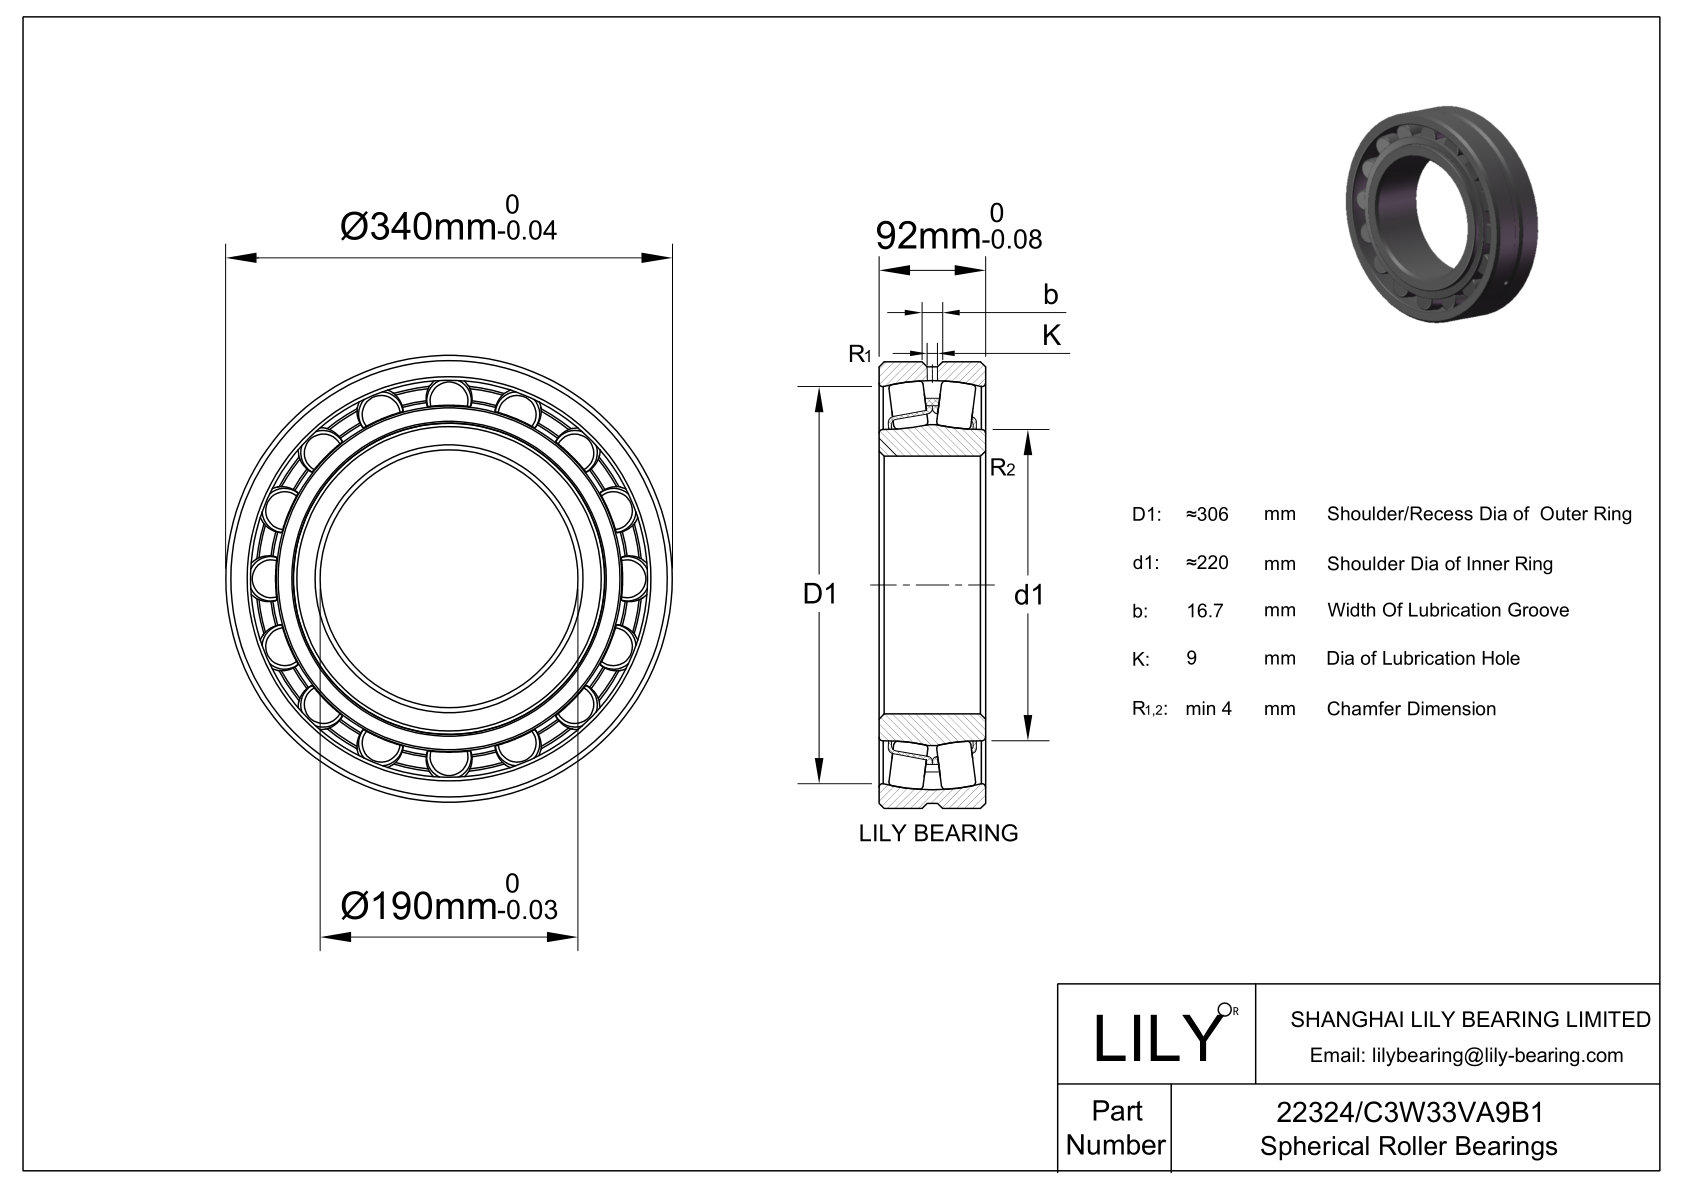 22324/C3W33VA9B1 Double Row Spherical Roller Bearing cad drawing